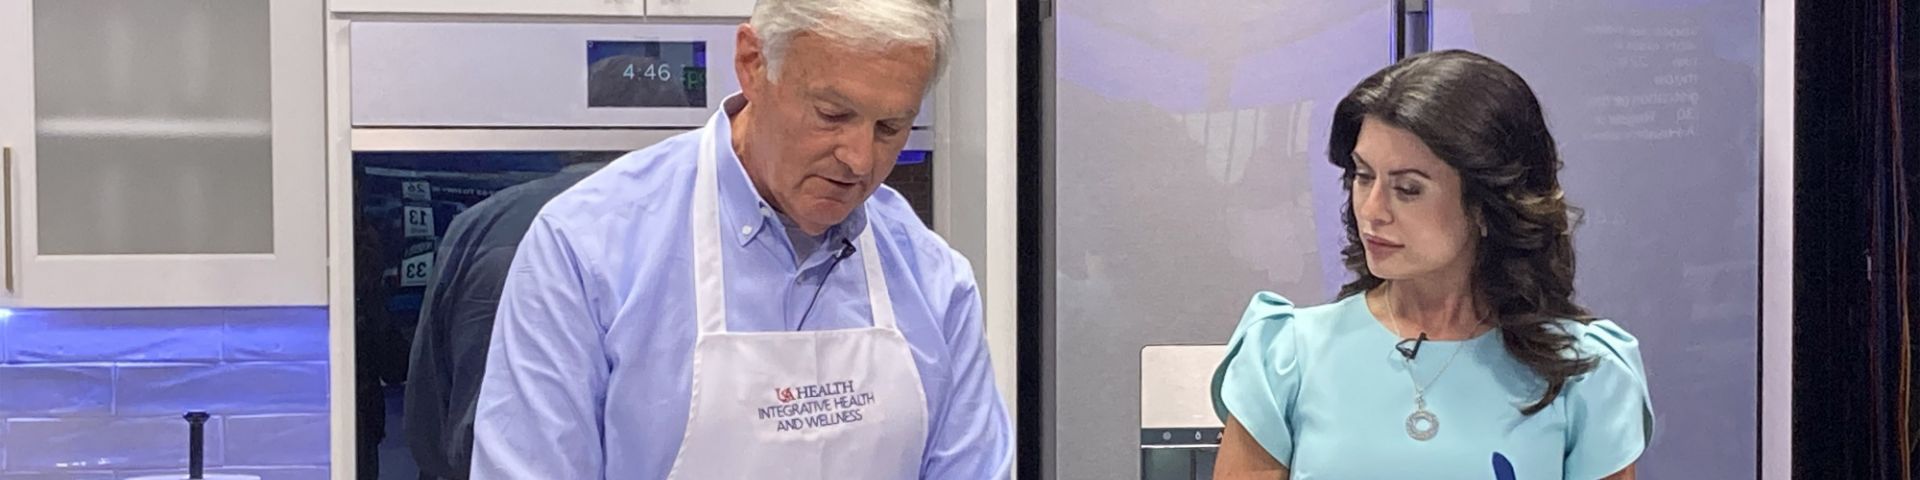 Robert Israel, M.D., demonstrates cooking a healthy recipe on WKRG.